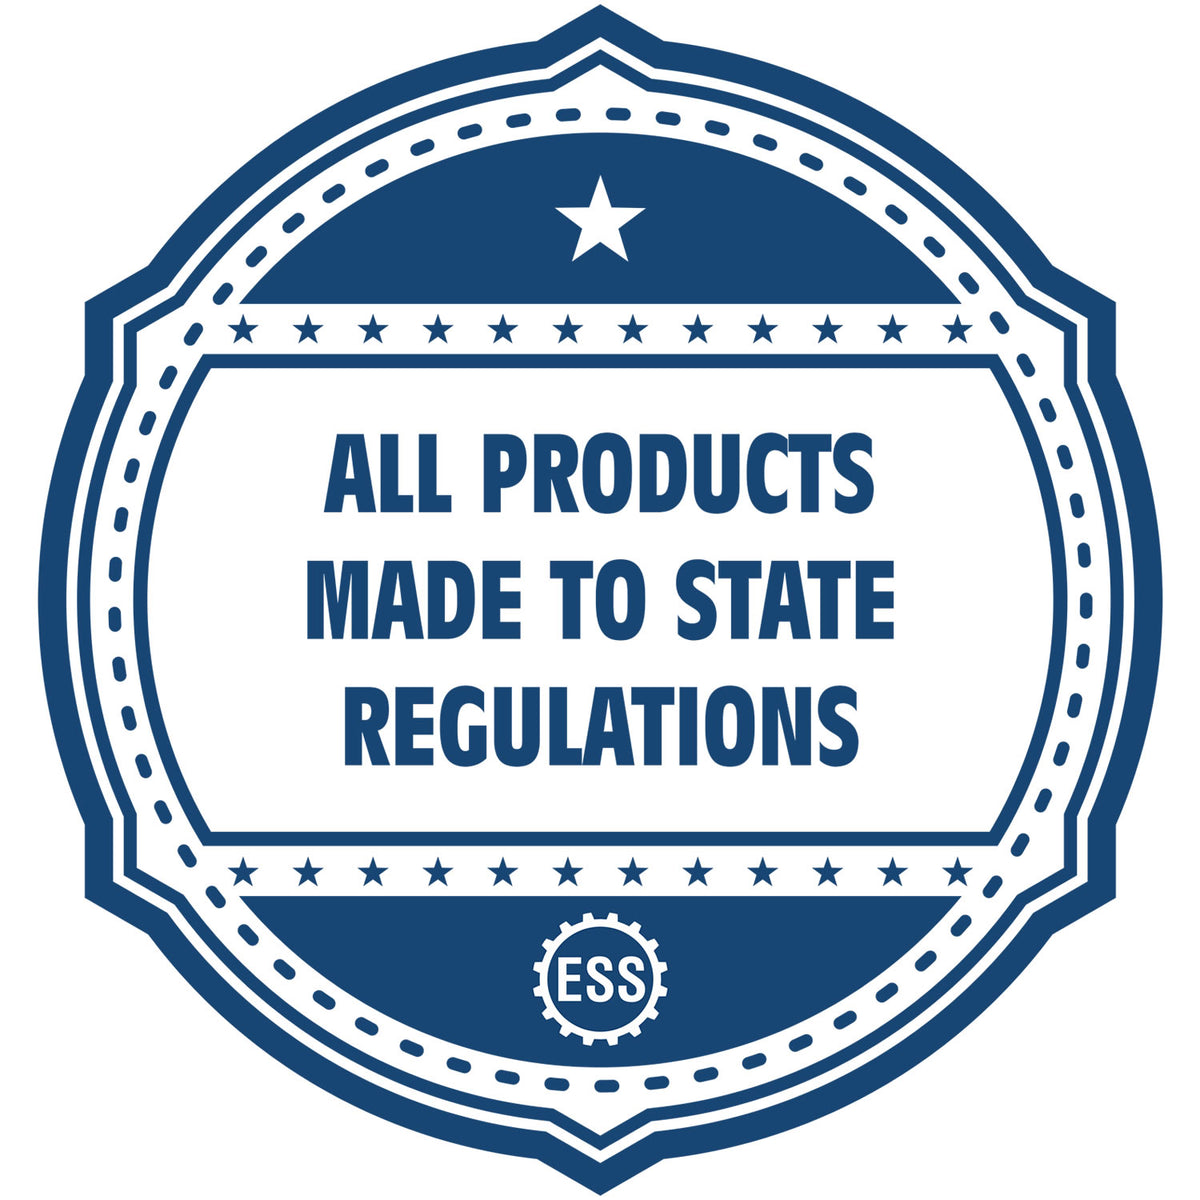 An icon or badge element for the Slim Pre-Inked Texas Architect Seal Stamp showing that this product is made in compliance with state regulations.